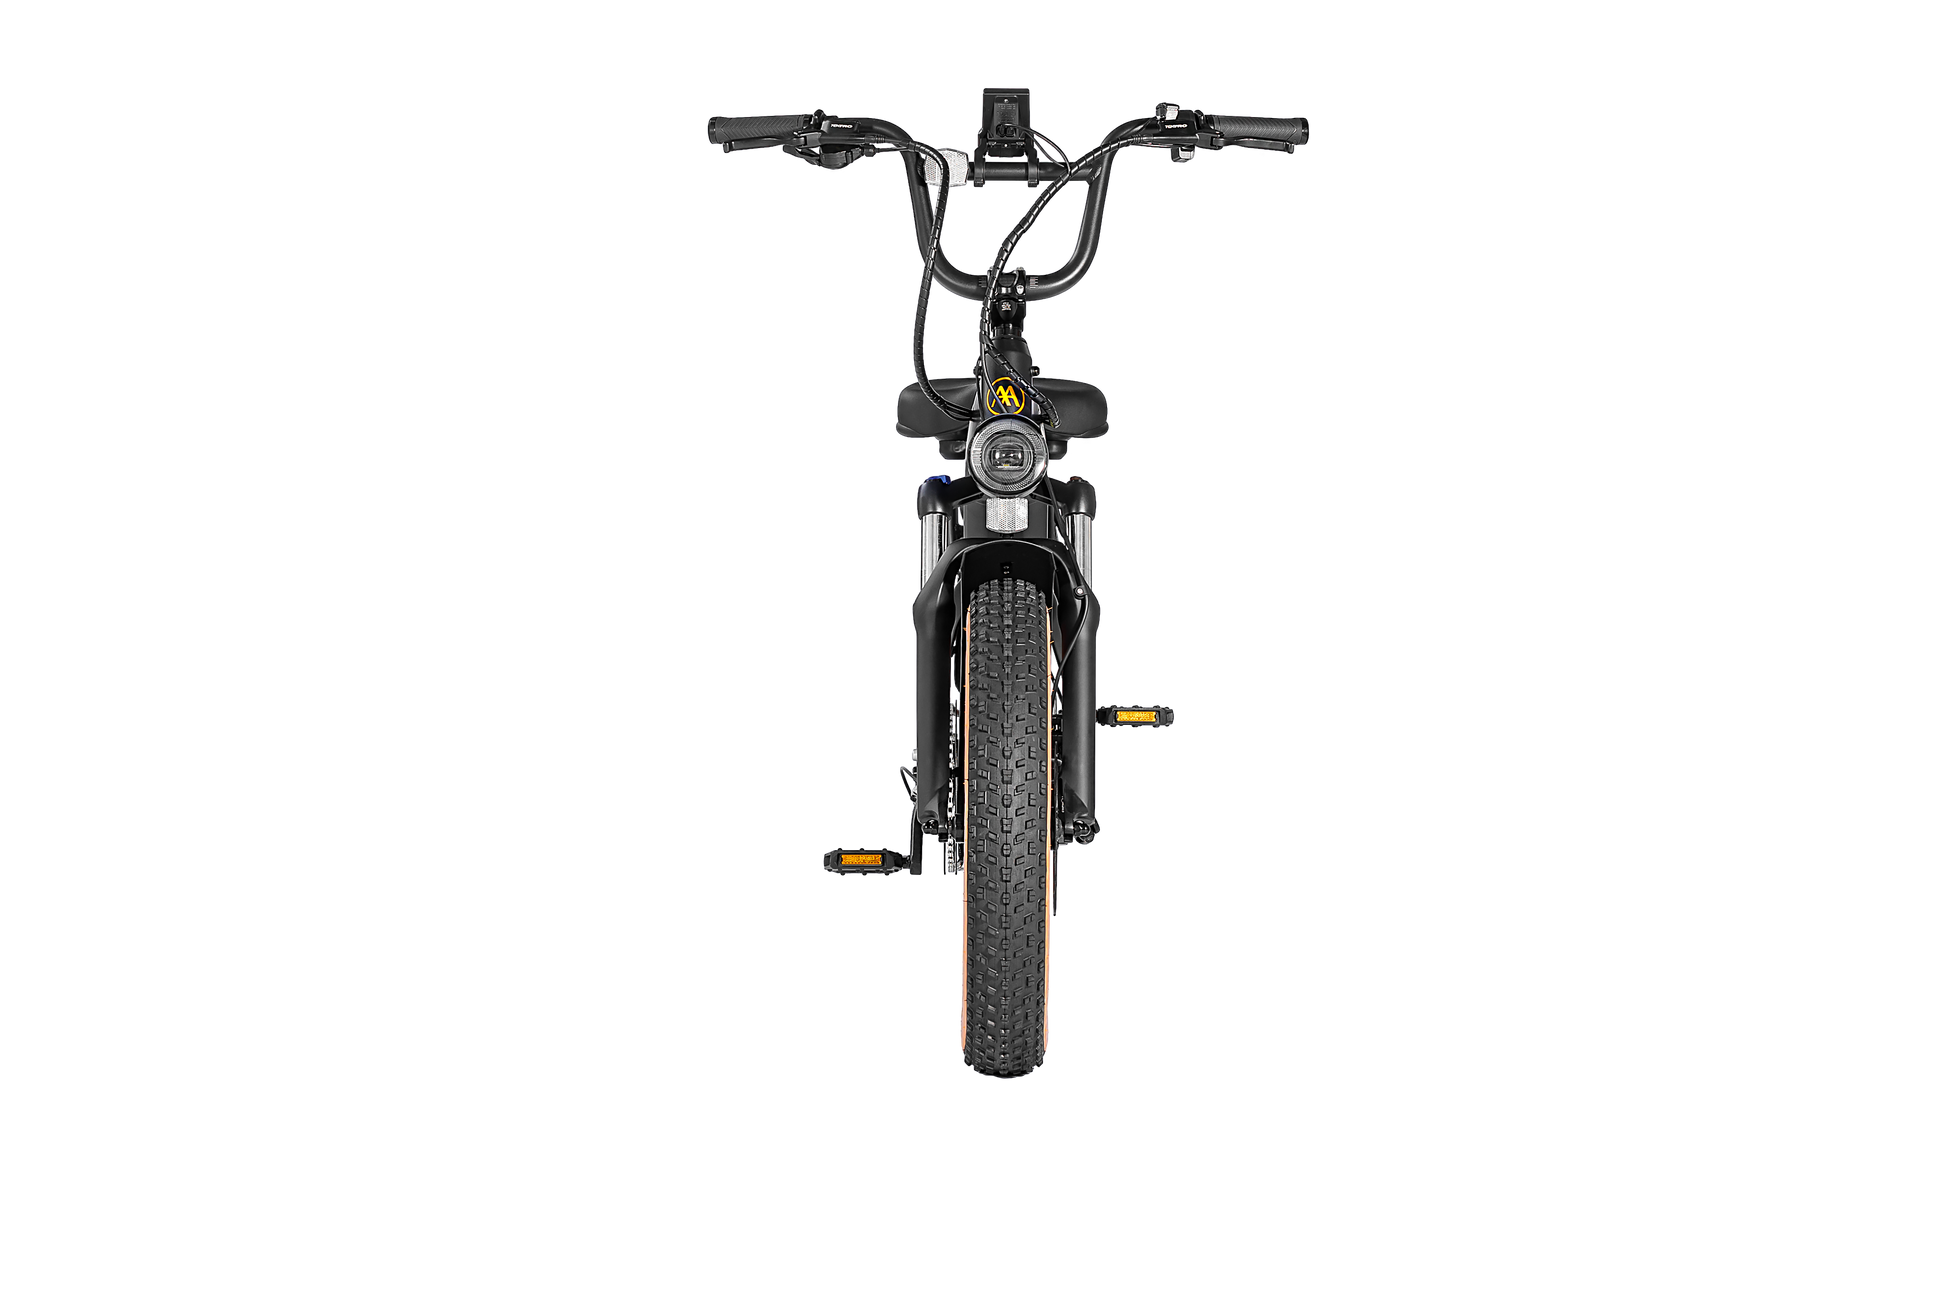 Front view of a black AIMA - Big Sur Sport electric bicycle with a central headlight, fat tires, and raised handlebars against a plain black background.